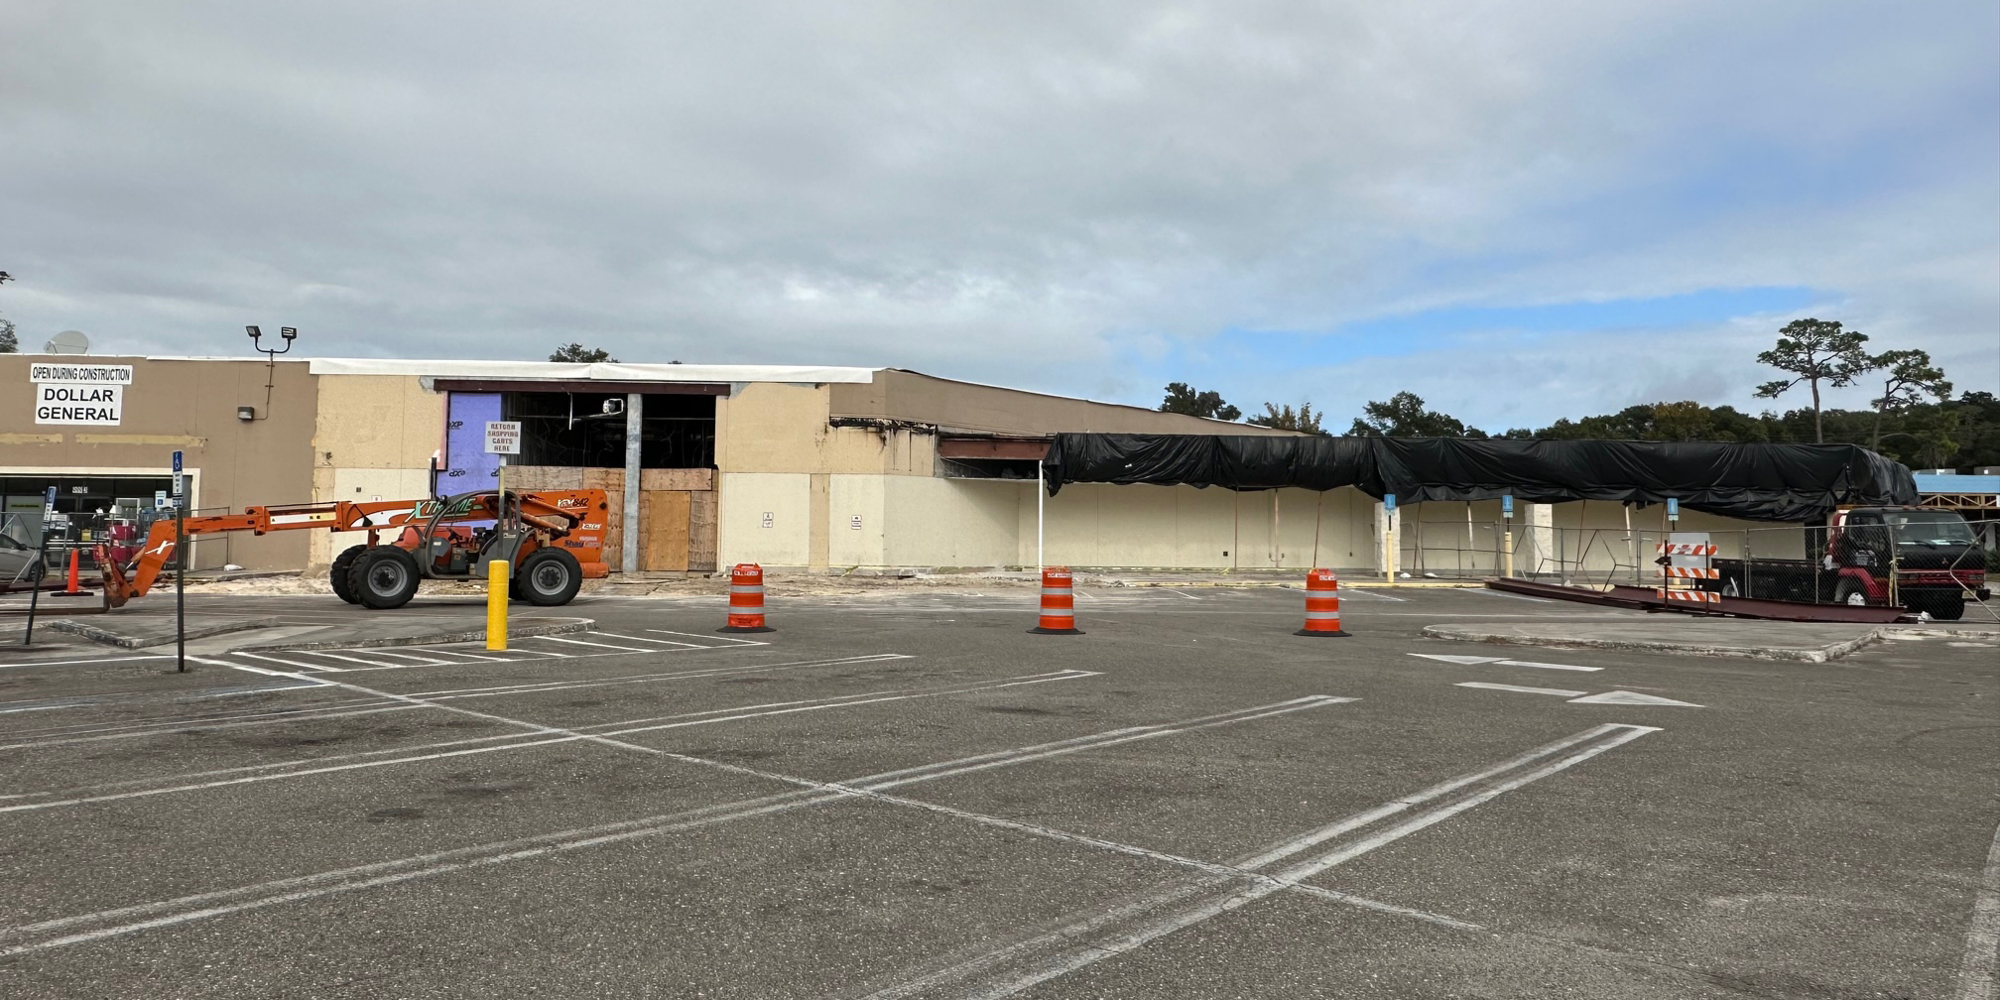 Winn-Dixie intends to reopen next year at College Park after facade and interior renovations at the former Town & Country Shopping Center in Arlington.